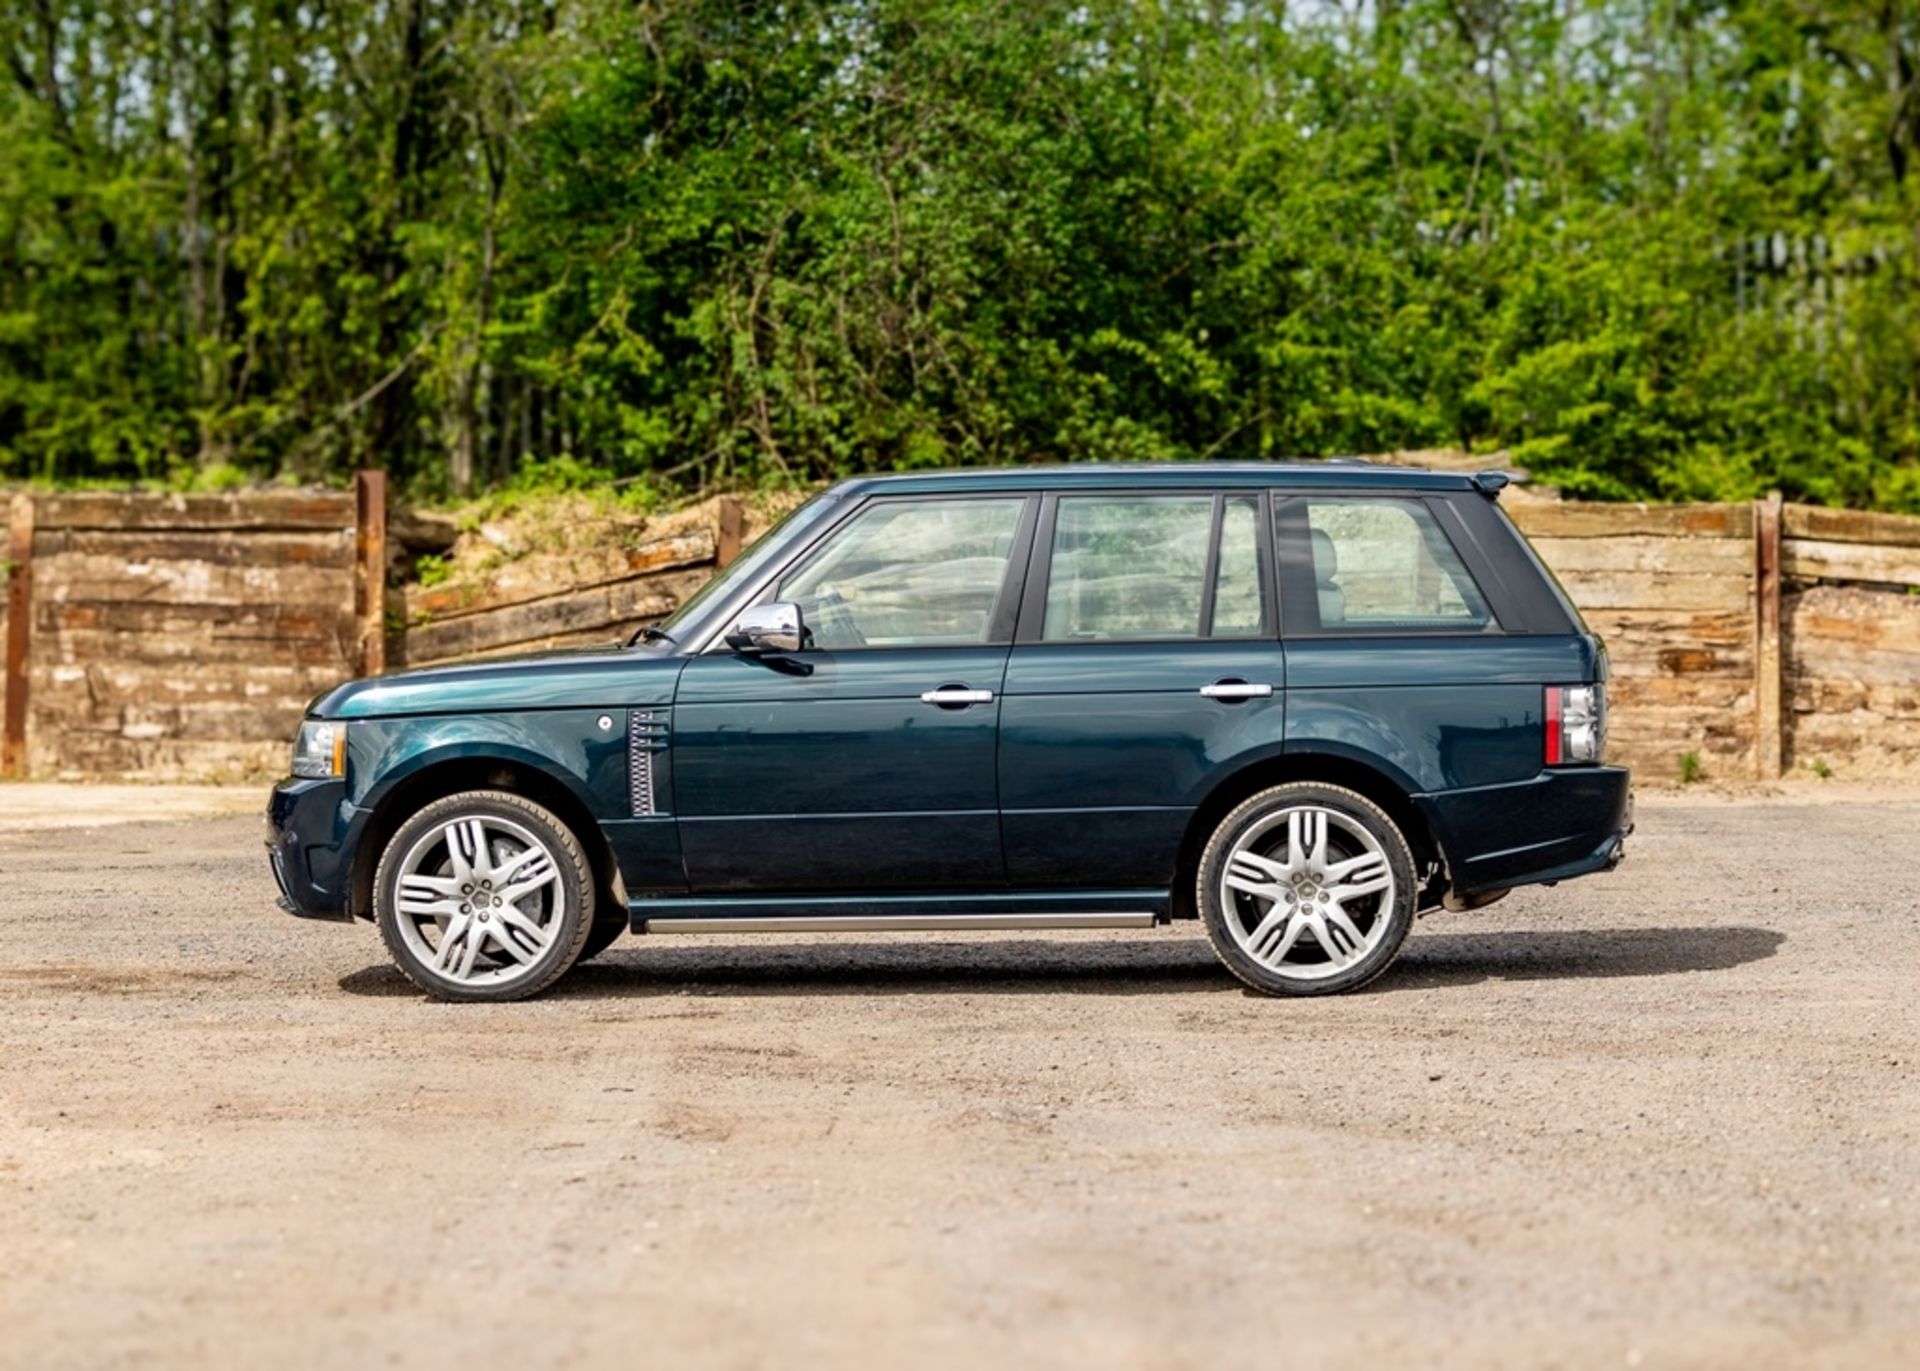 2009 Range Rover L322 Holland & Holland 5.0 Supercharged - Image 2 of 40